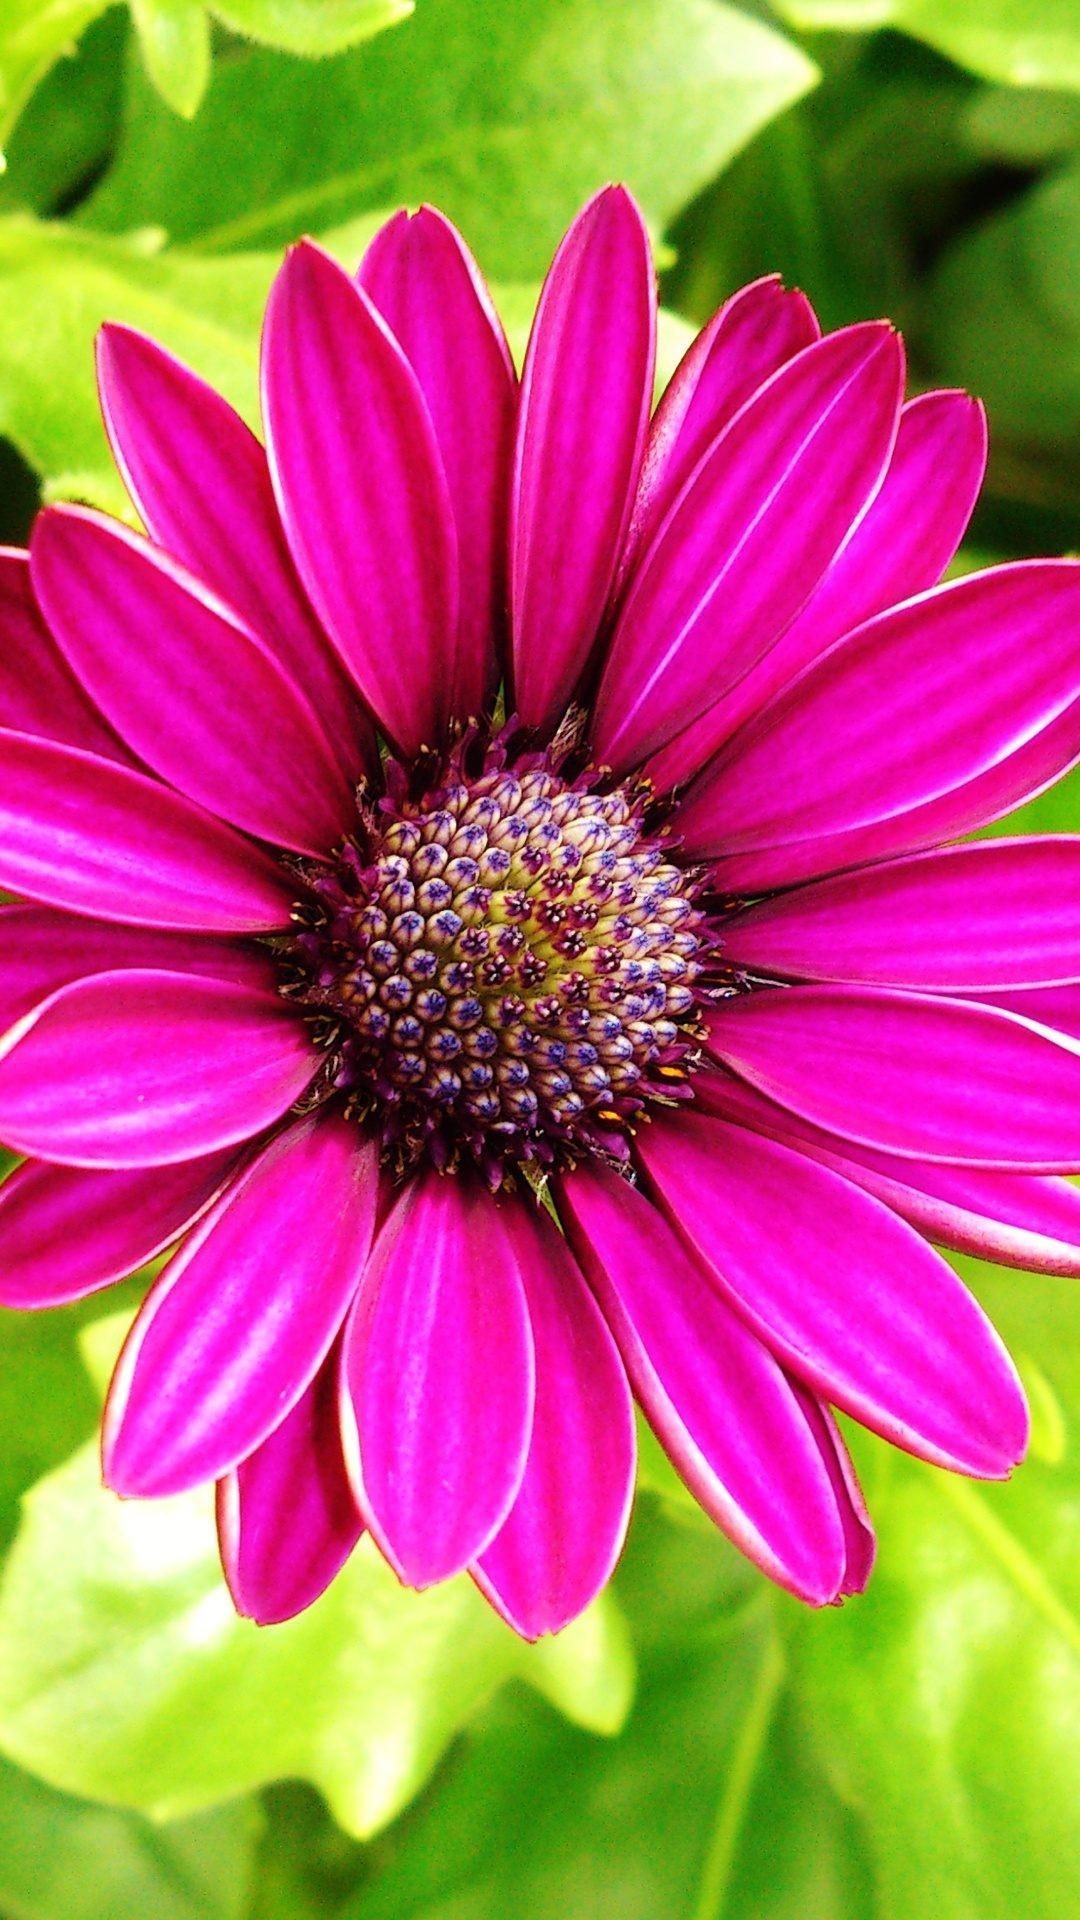 1080 x 1920 · jpeg - Colourful Flower Wallpapers - Wallpaper Cave